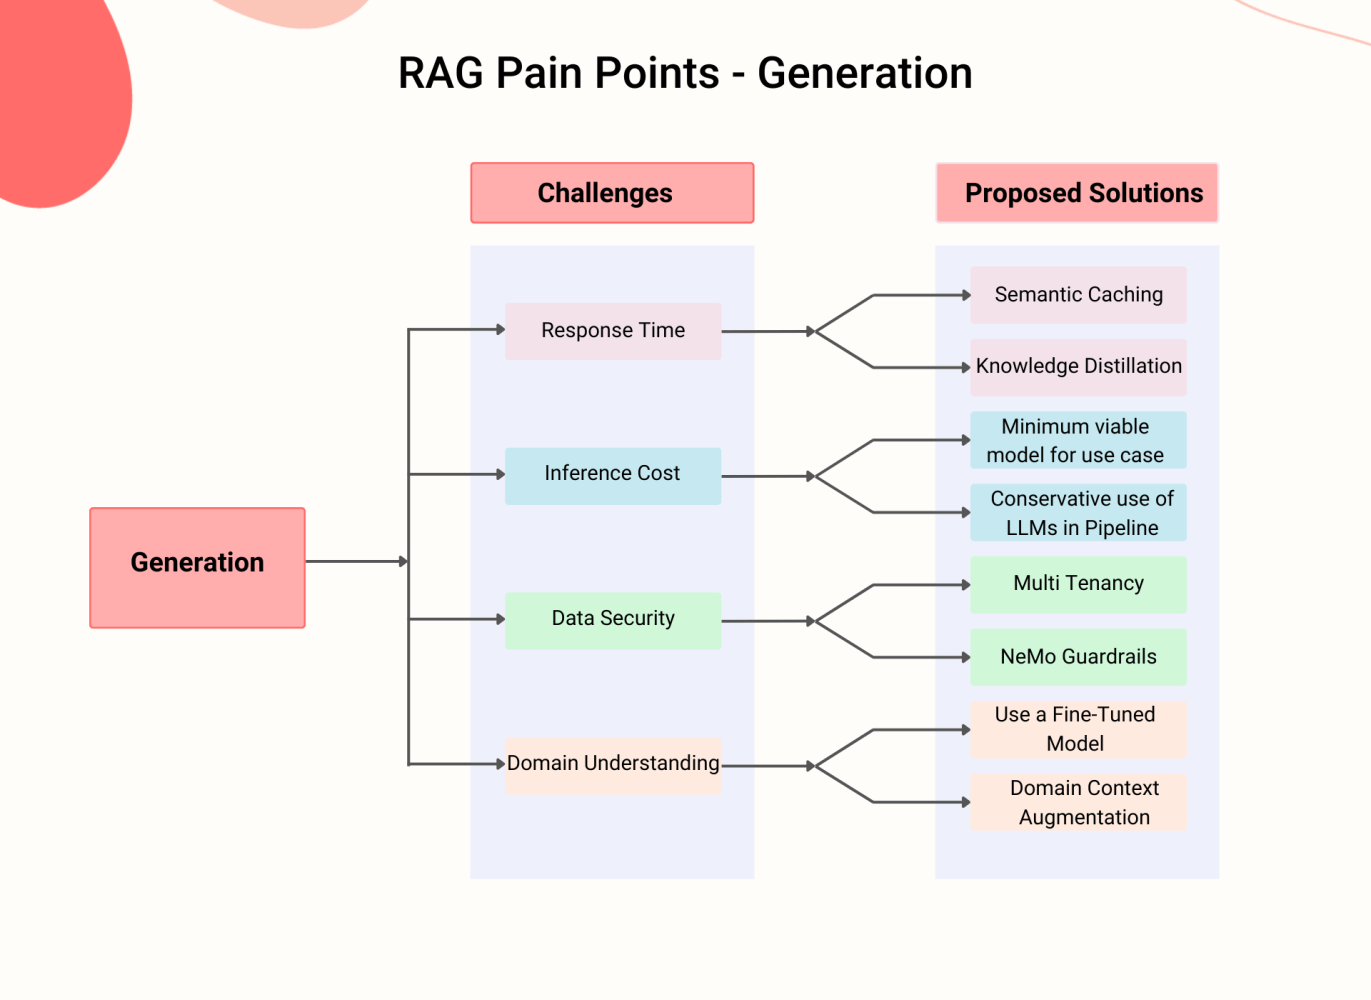 LLM RAG Model Pain Points and Solutions in the Generation Stage